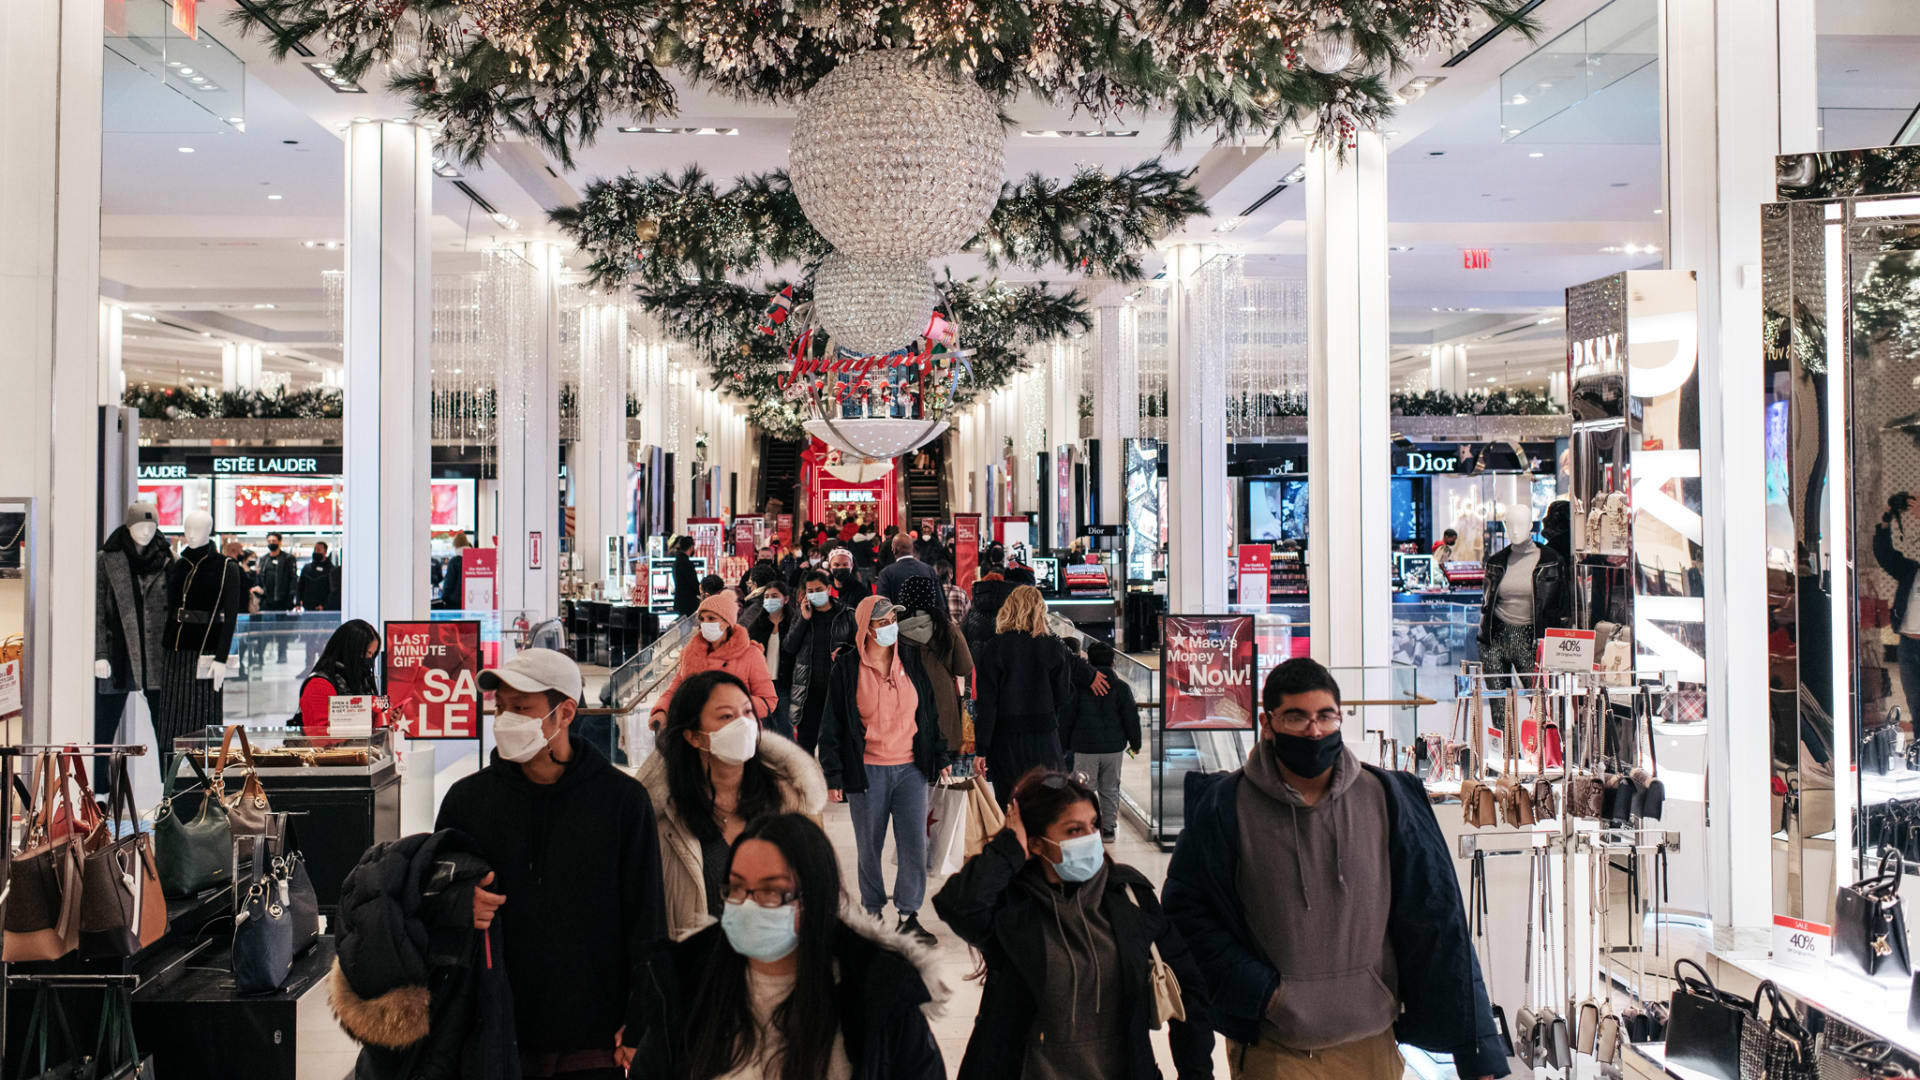 A Neuroscientist's Top 3 Tips to Avoid Emotional Overspending This Holiday Season